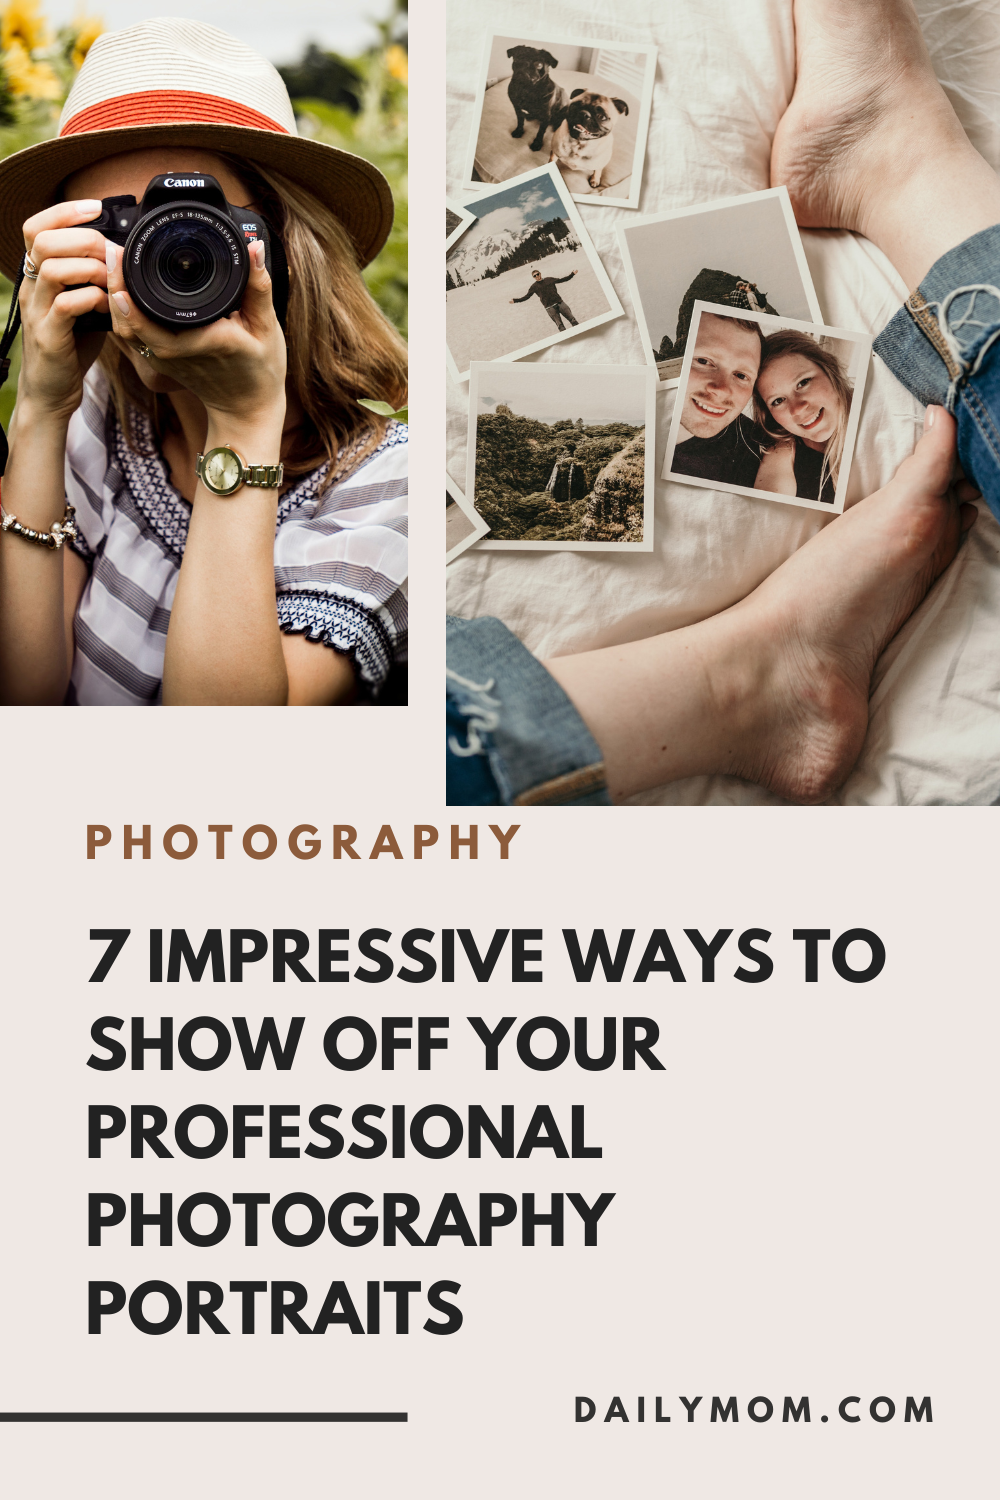 7 Impressive Ways To Show Off Your Professional Photography Portraits